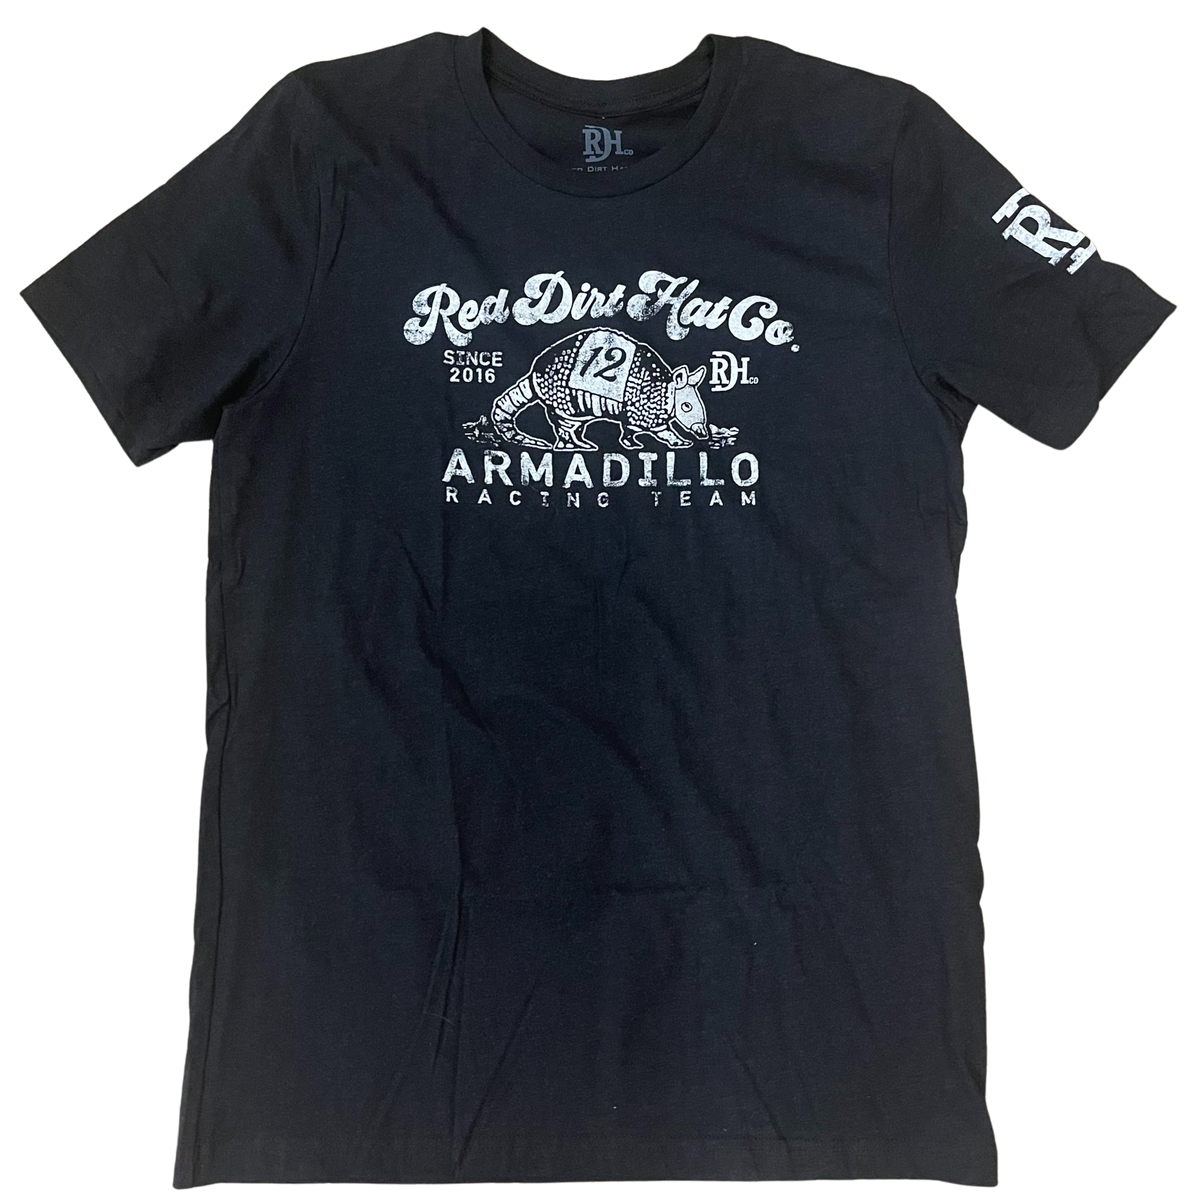 Red Dirt Hat Co. "Armadillo Racing Team" T-Shirt